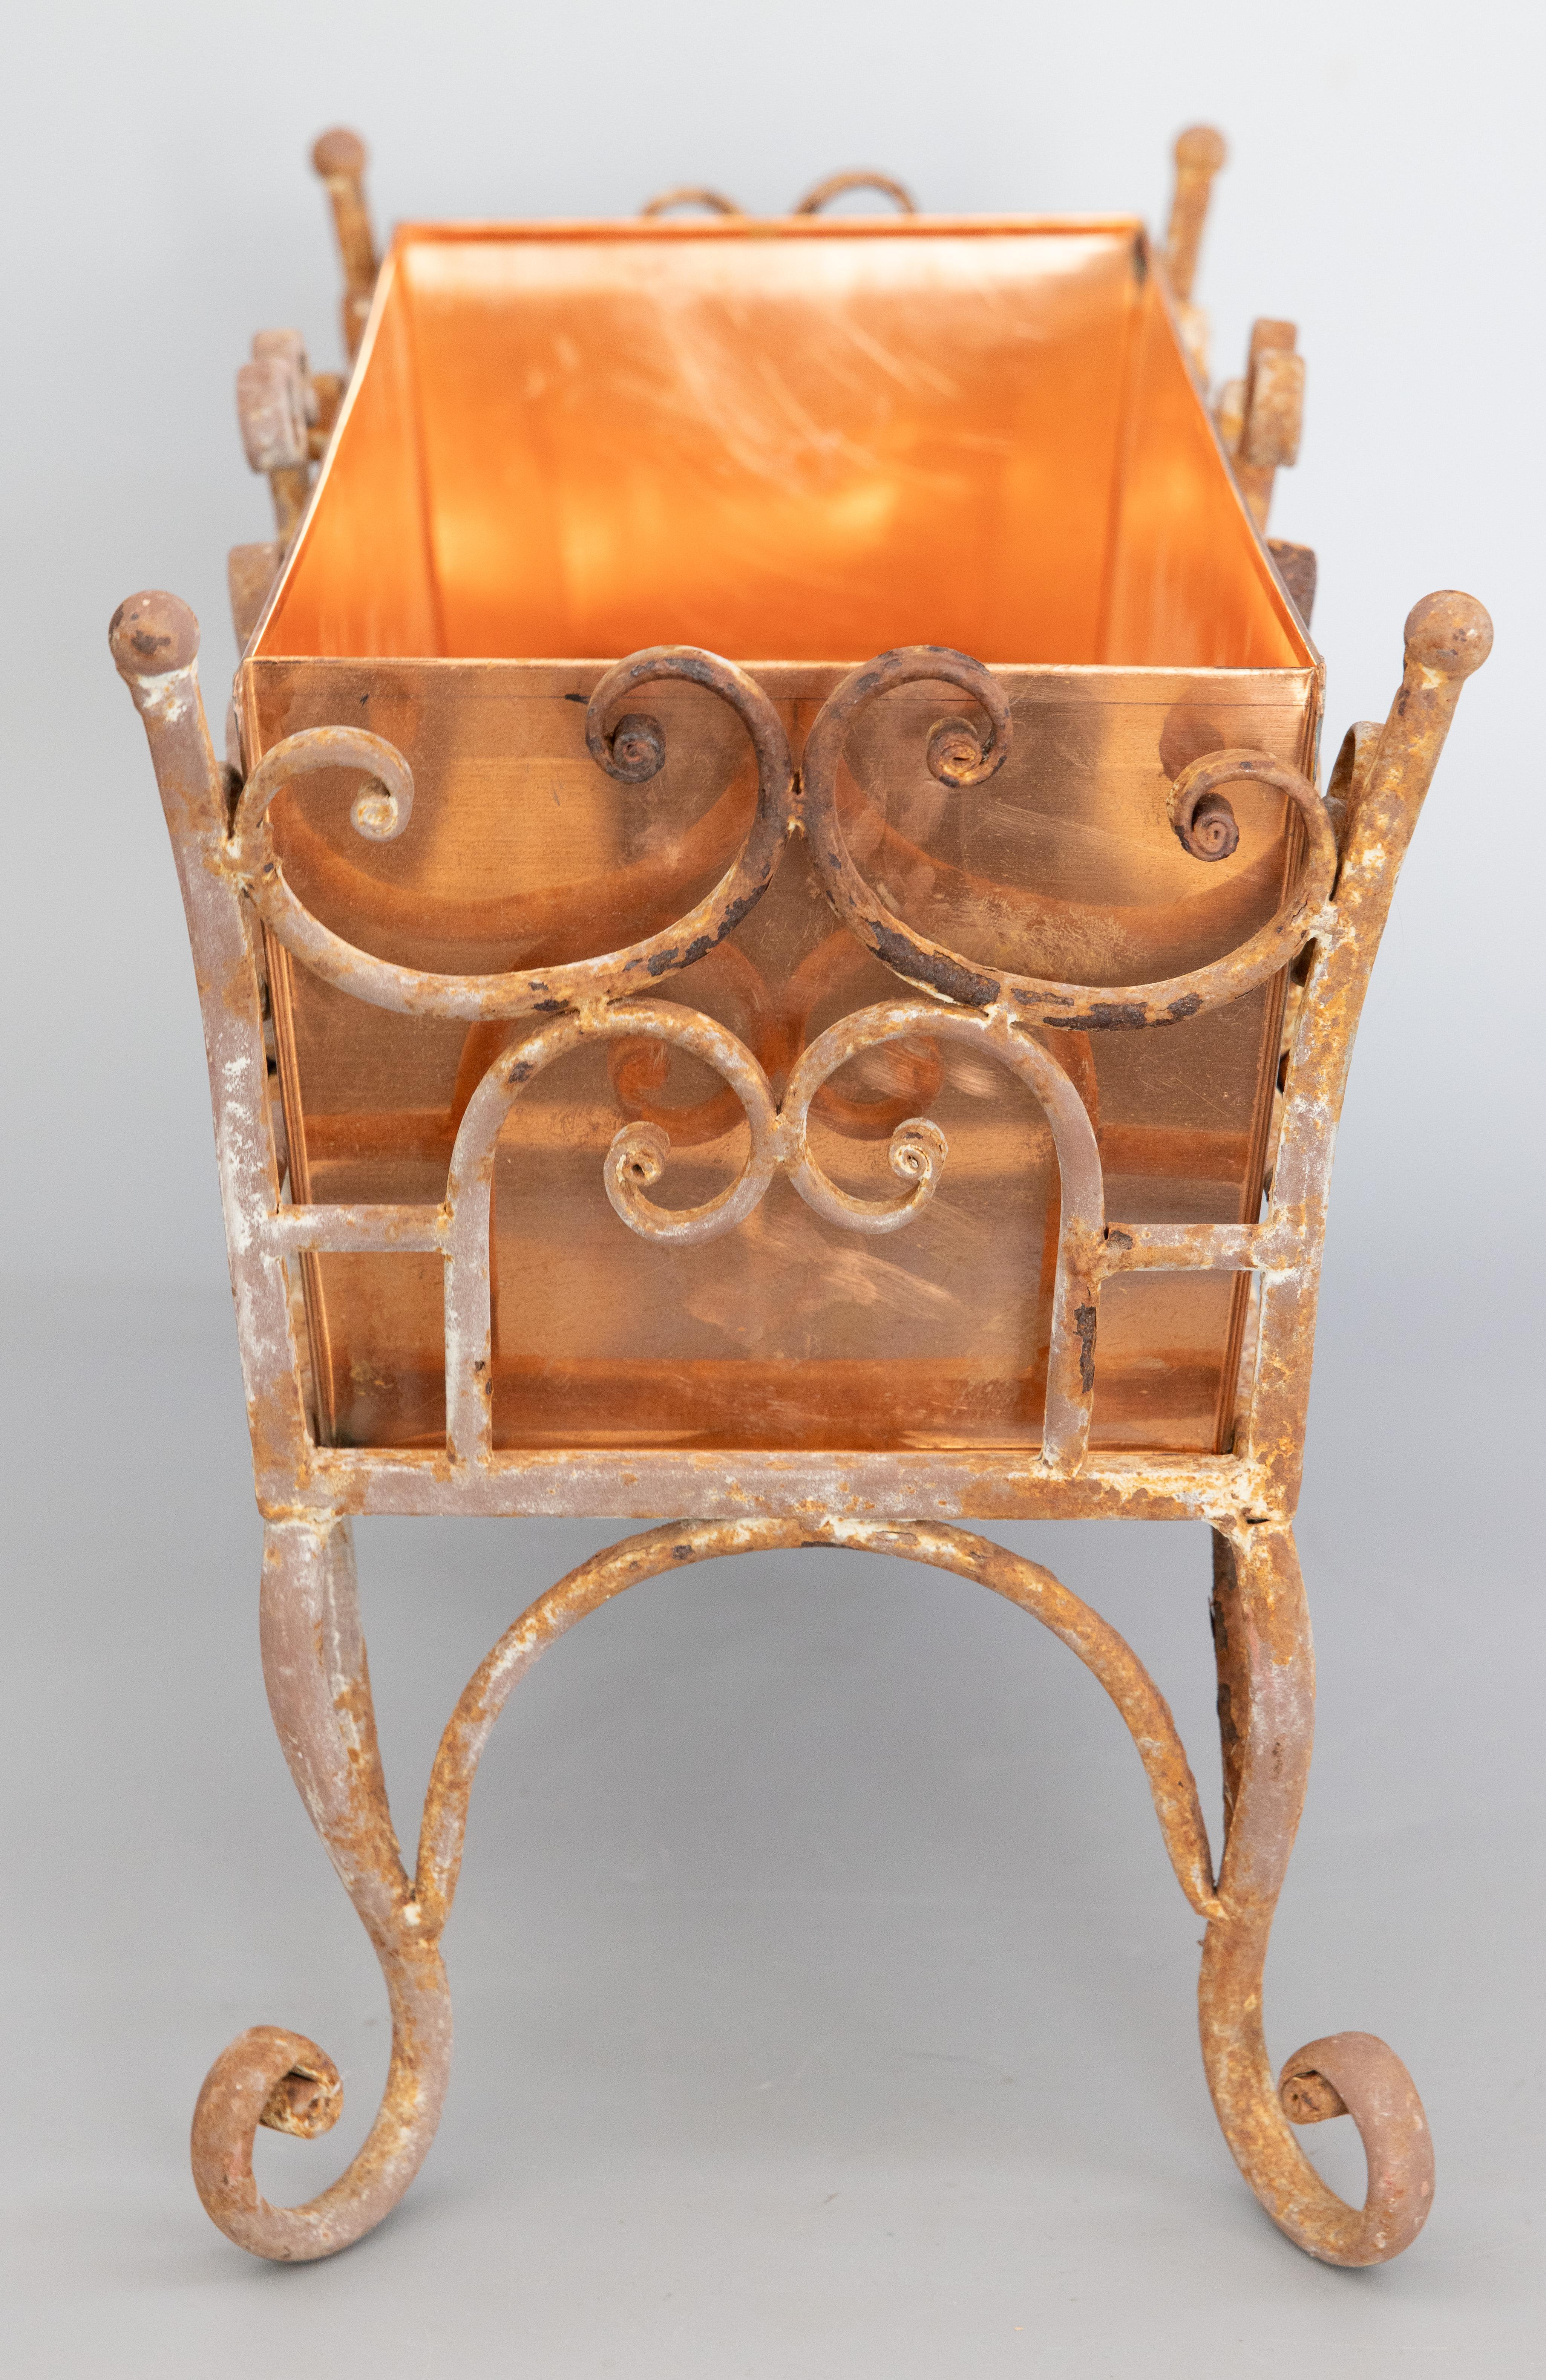 19th Century French Wrought Iron Jardiniere Wine Cooler With Custom Copper Liner In Good Condition For Sale In Pearland, TX